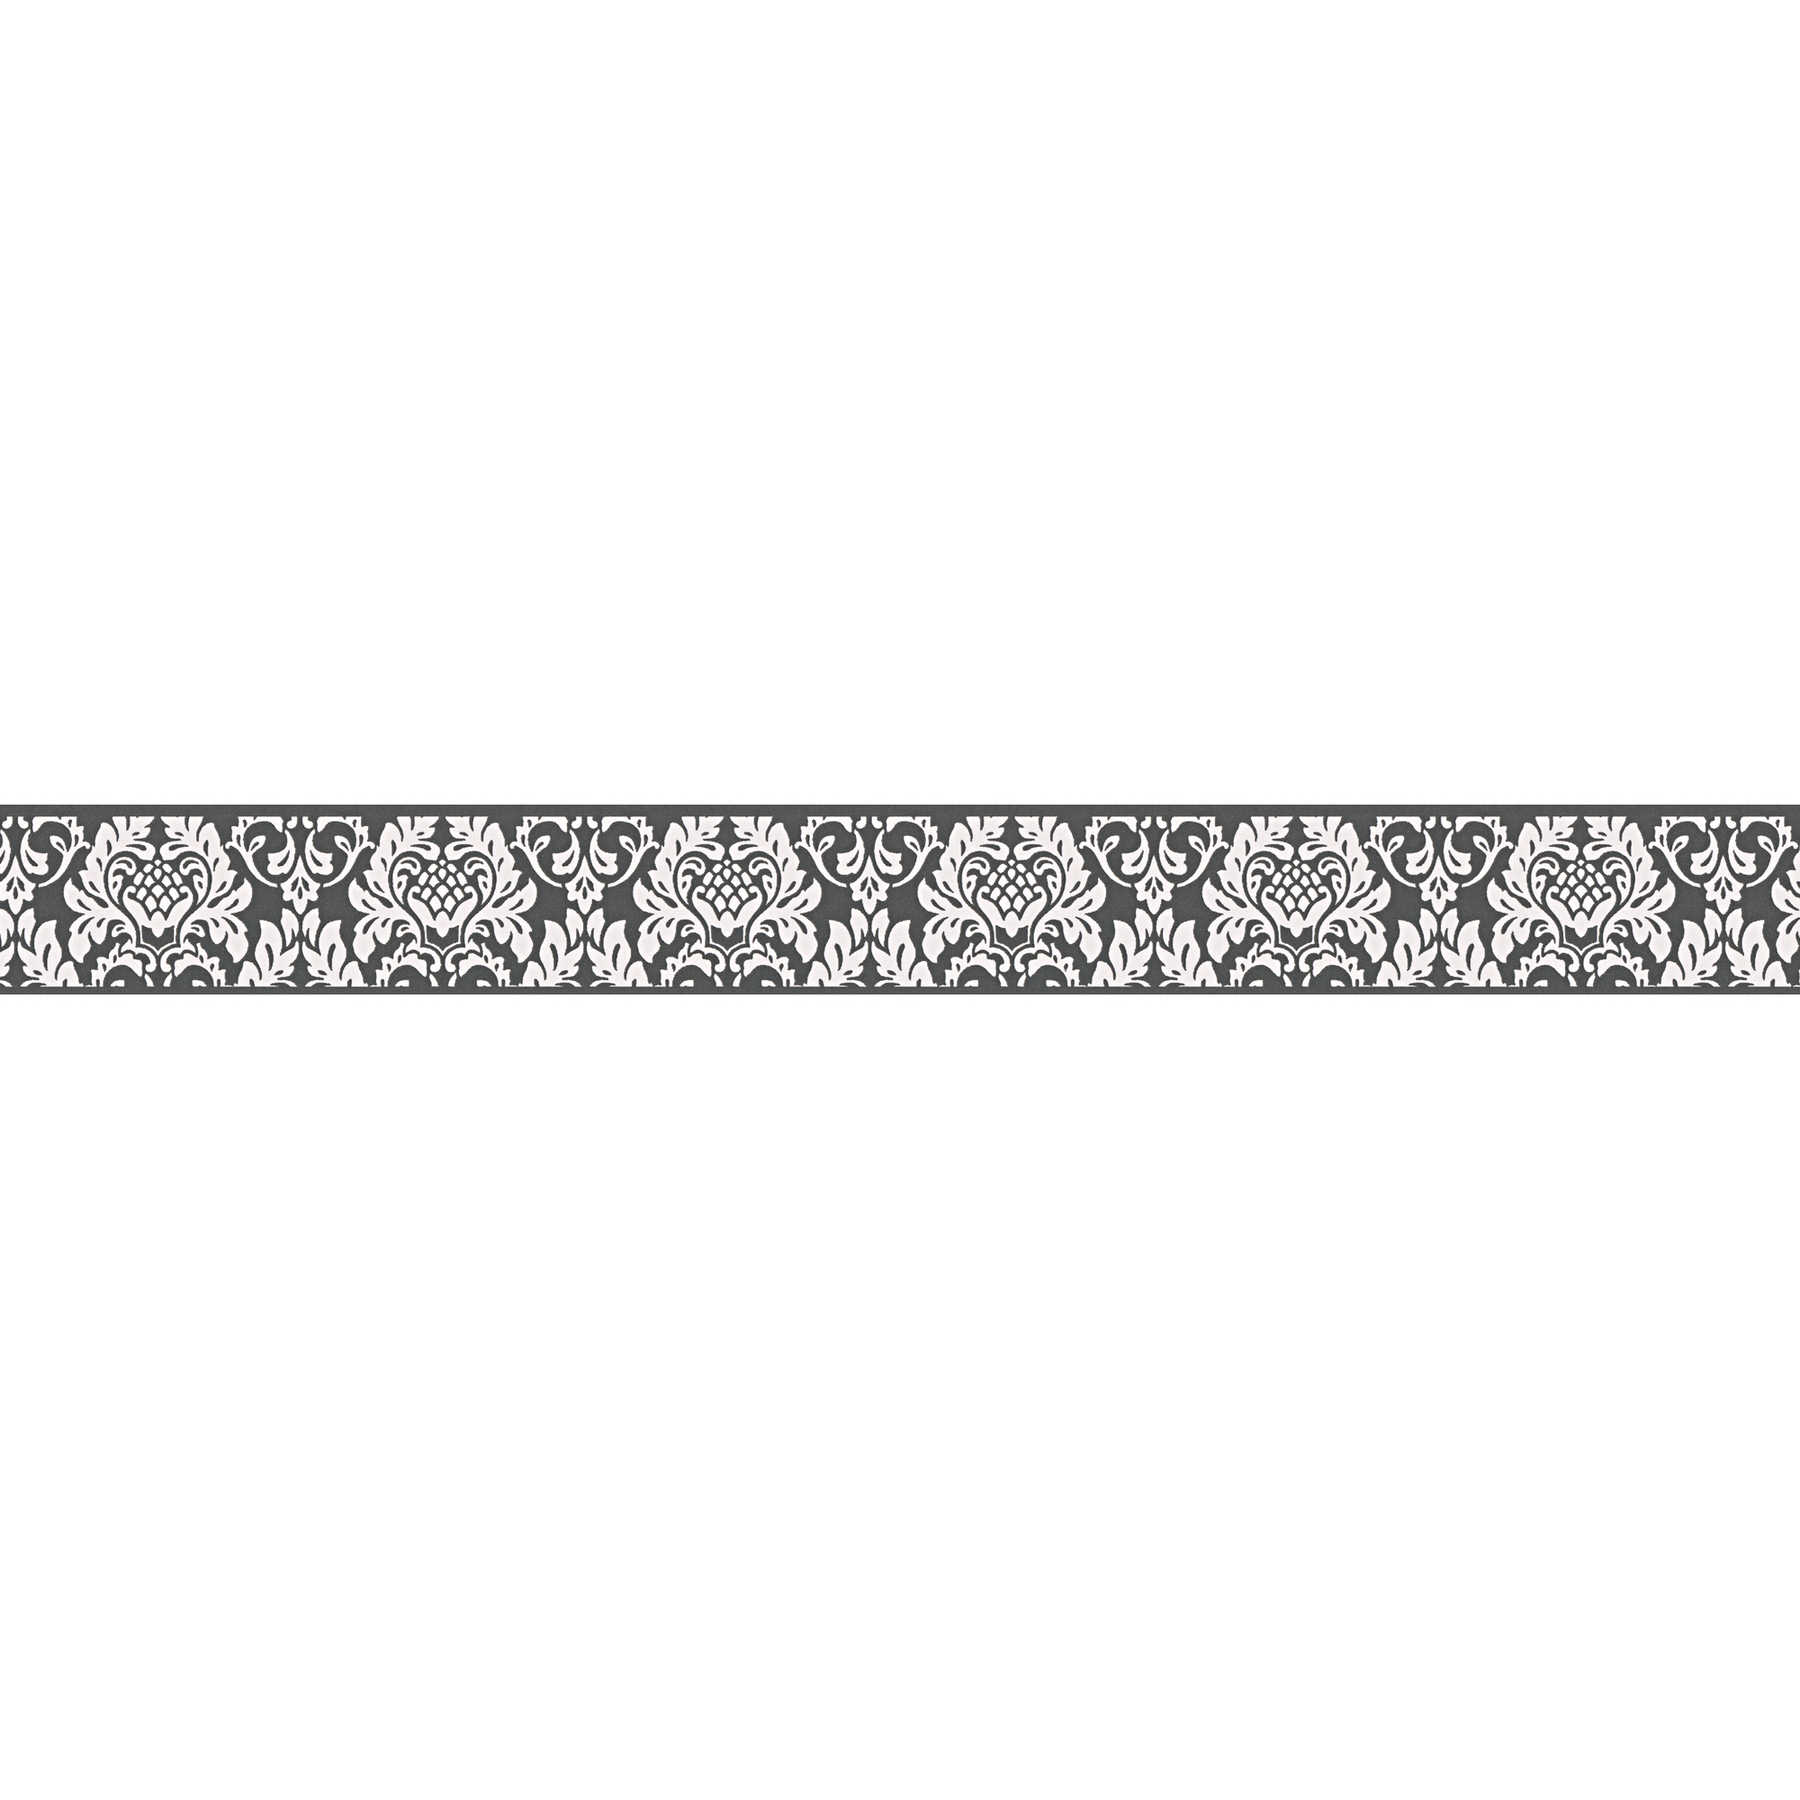         Black and white border with ornament pattern - White, Black
    